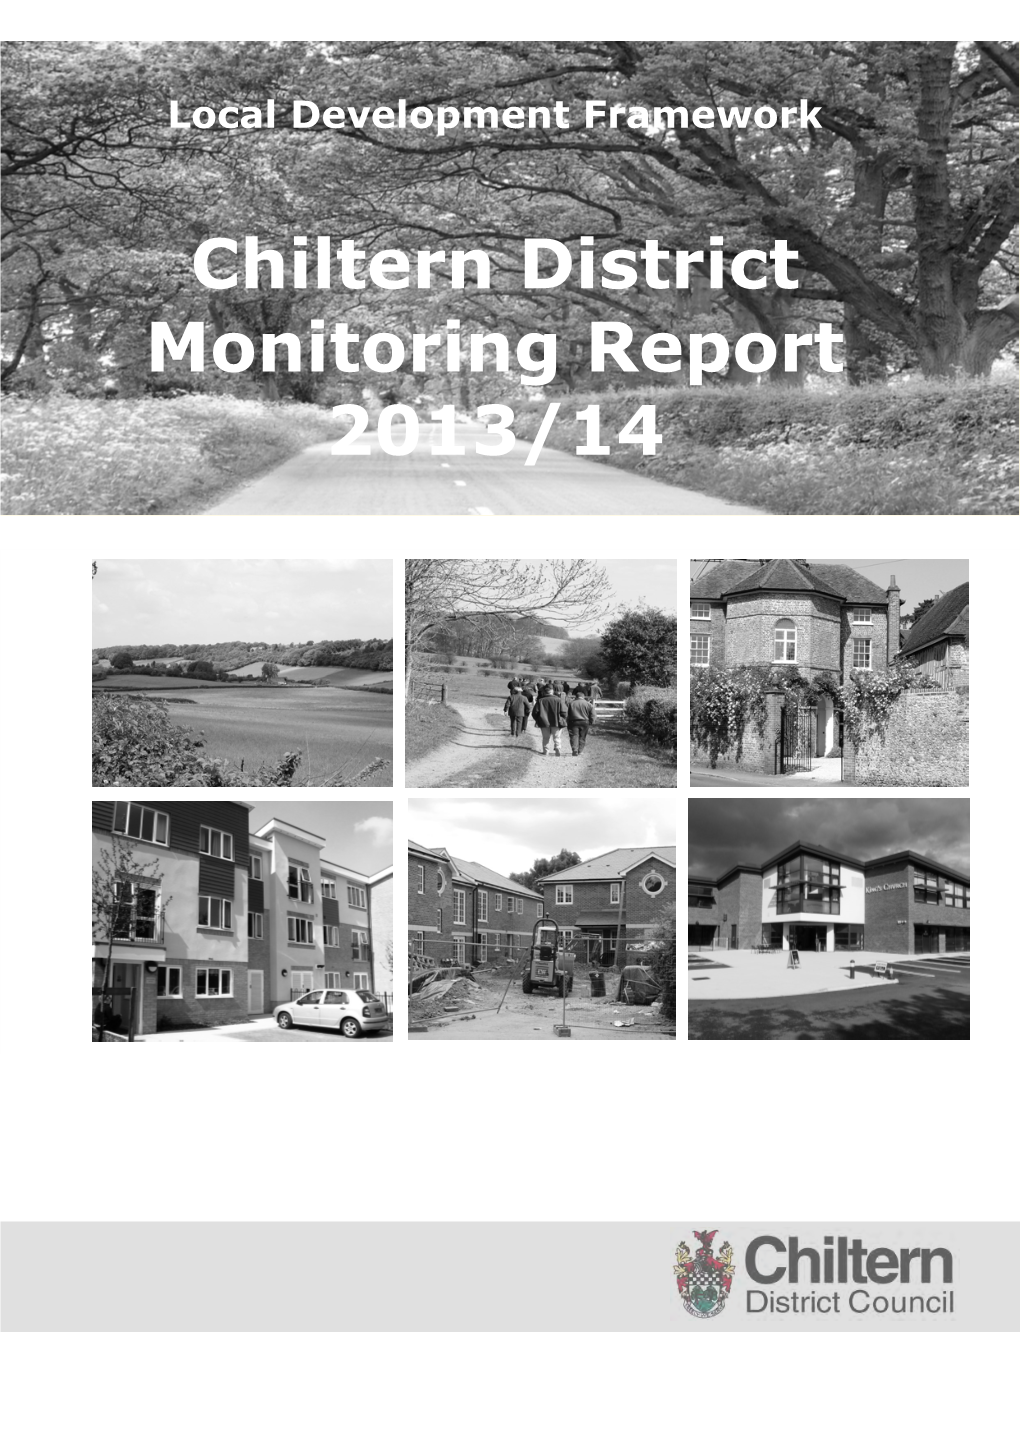 Chiltern District Monitoring Report 2013/14